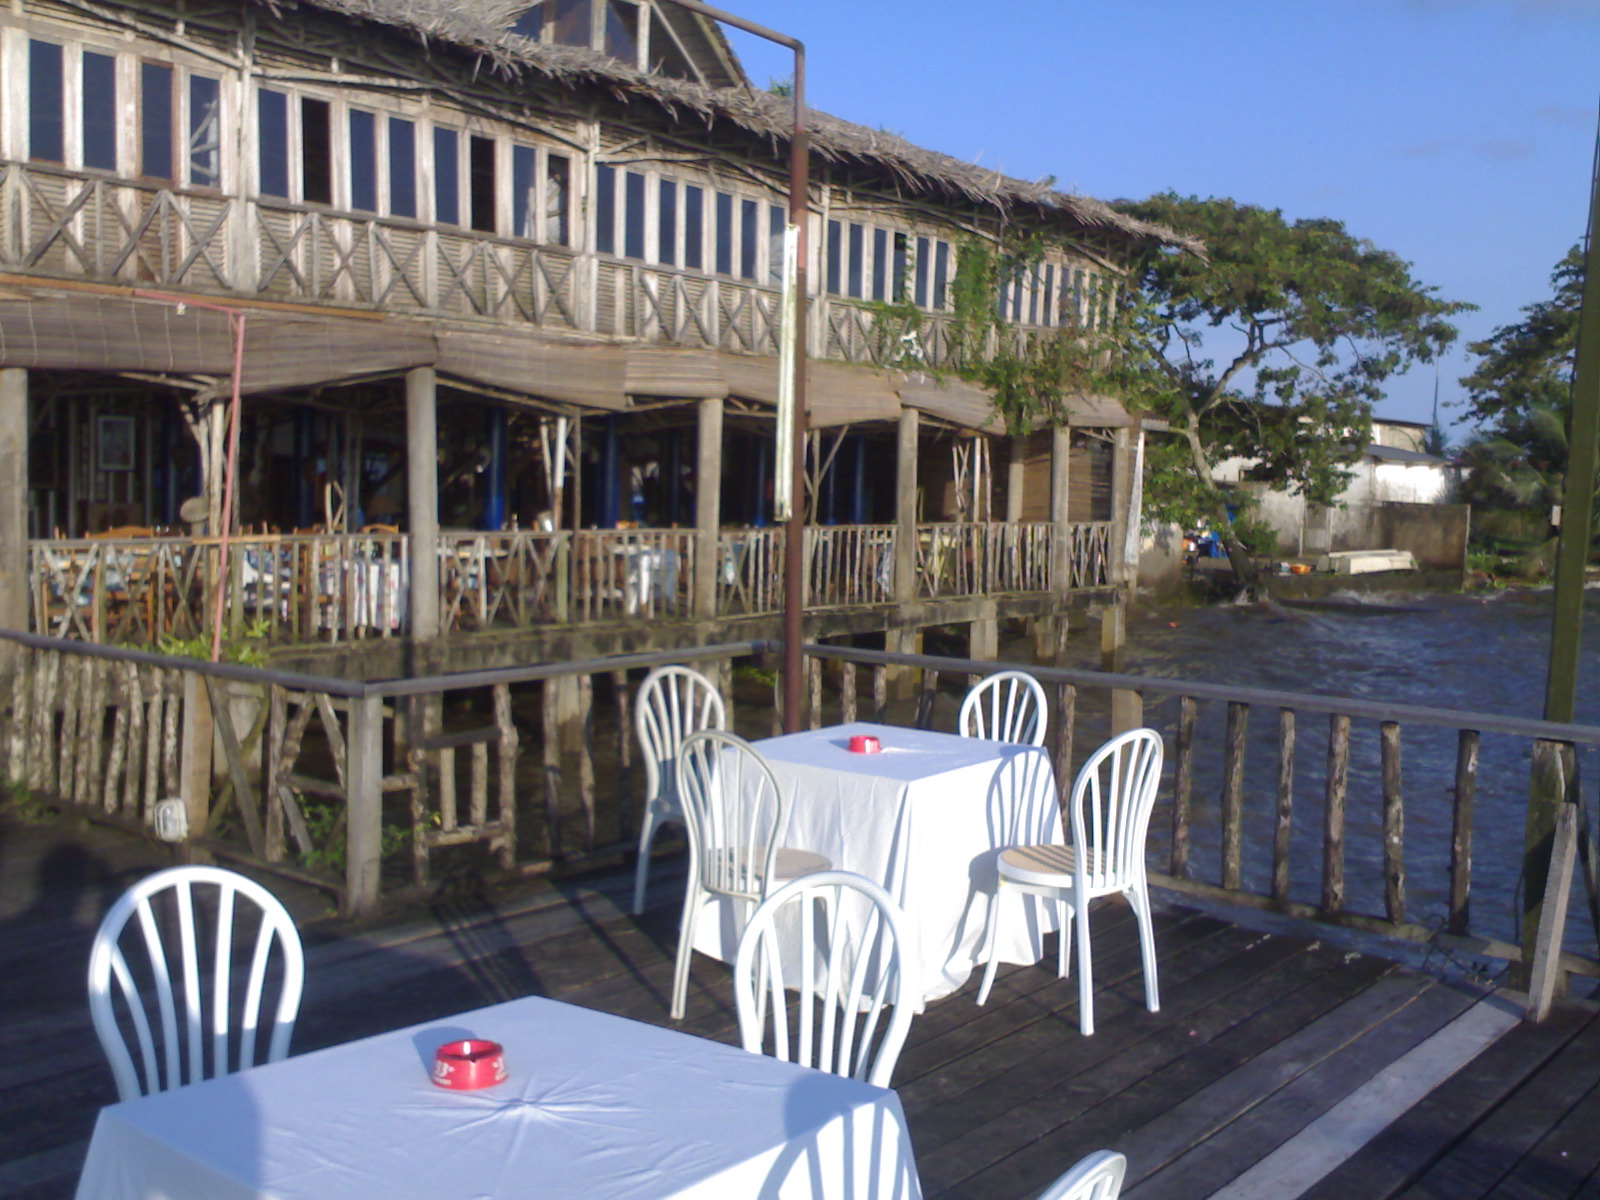 [Restaurant+at+the+waterfront.jpg]